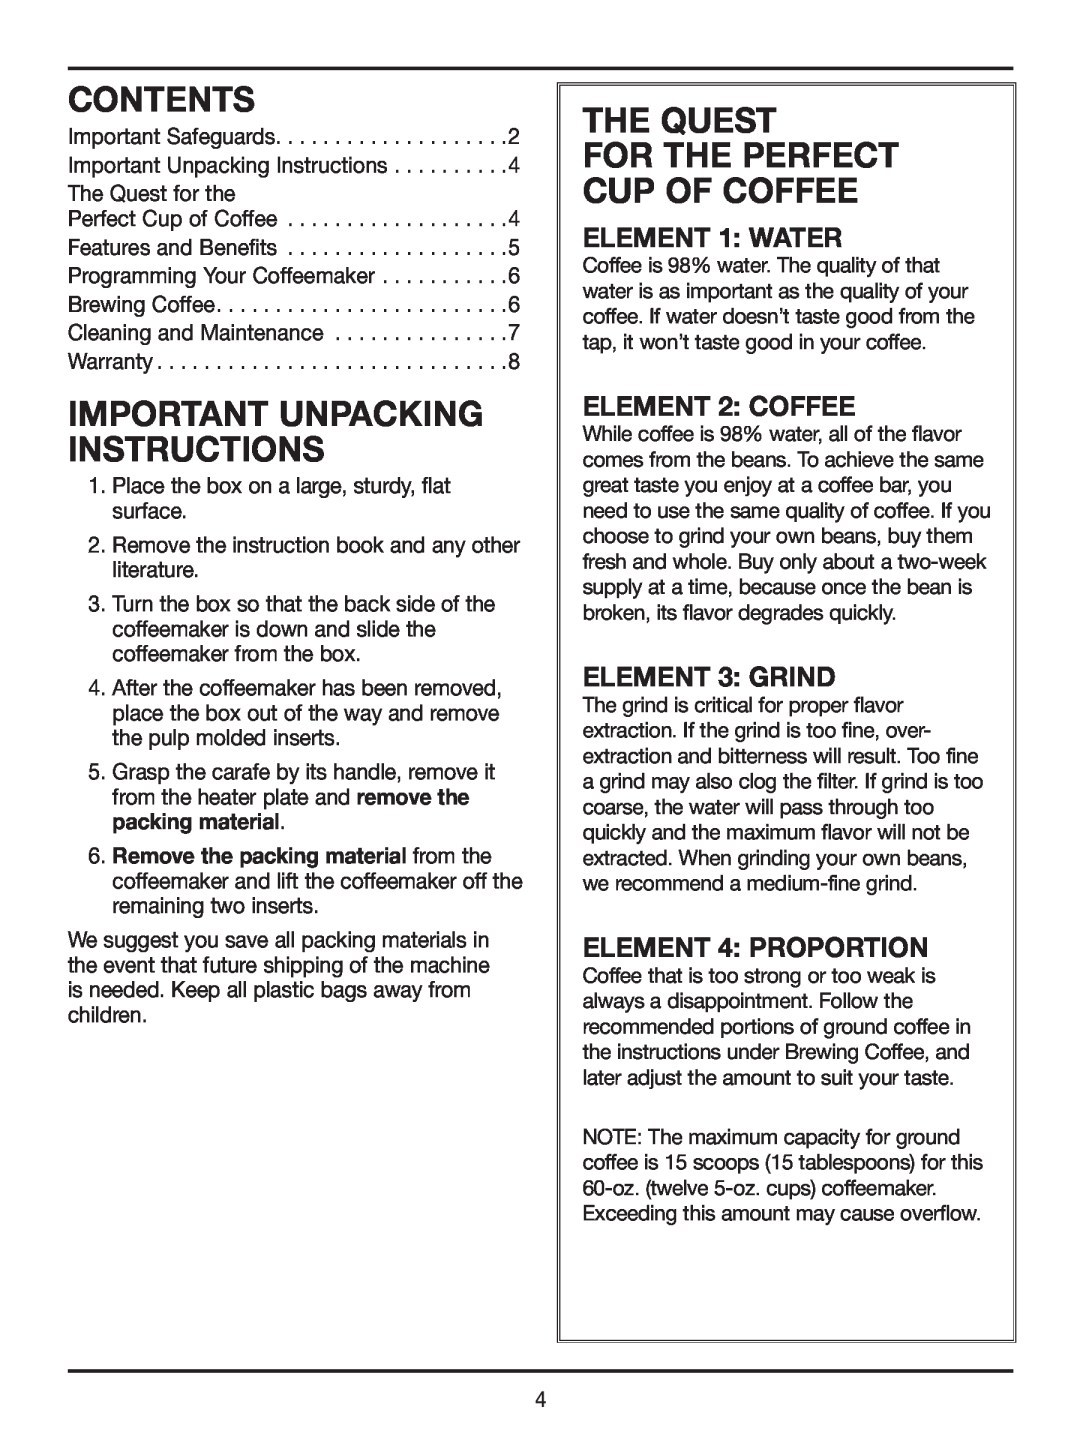 Cuisinart DTC-975BKN Contents, IMPORtant UNPACKING INSTRUCTIONS, The Quest, For The Perfect Cup Of Coffee, Element 1 Water 